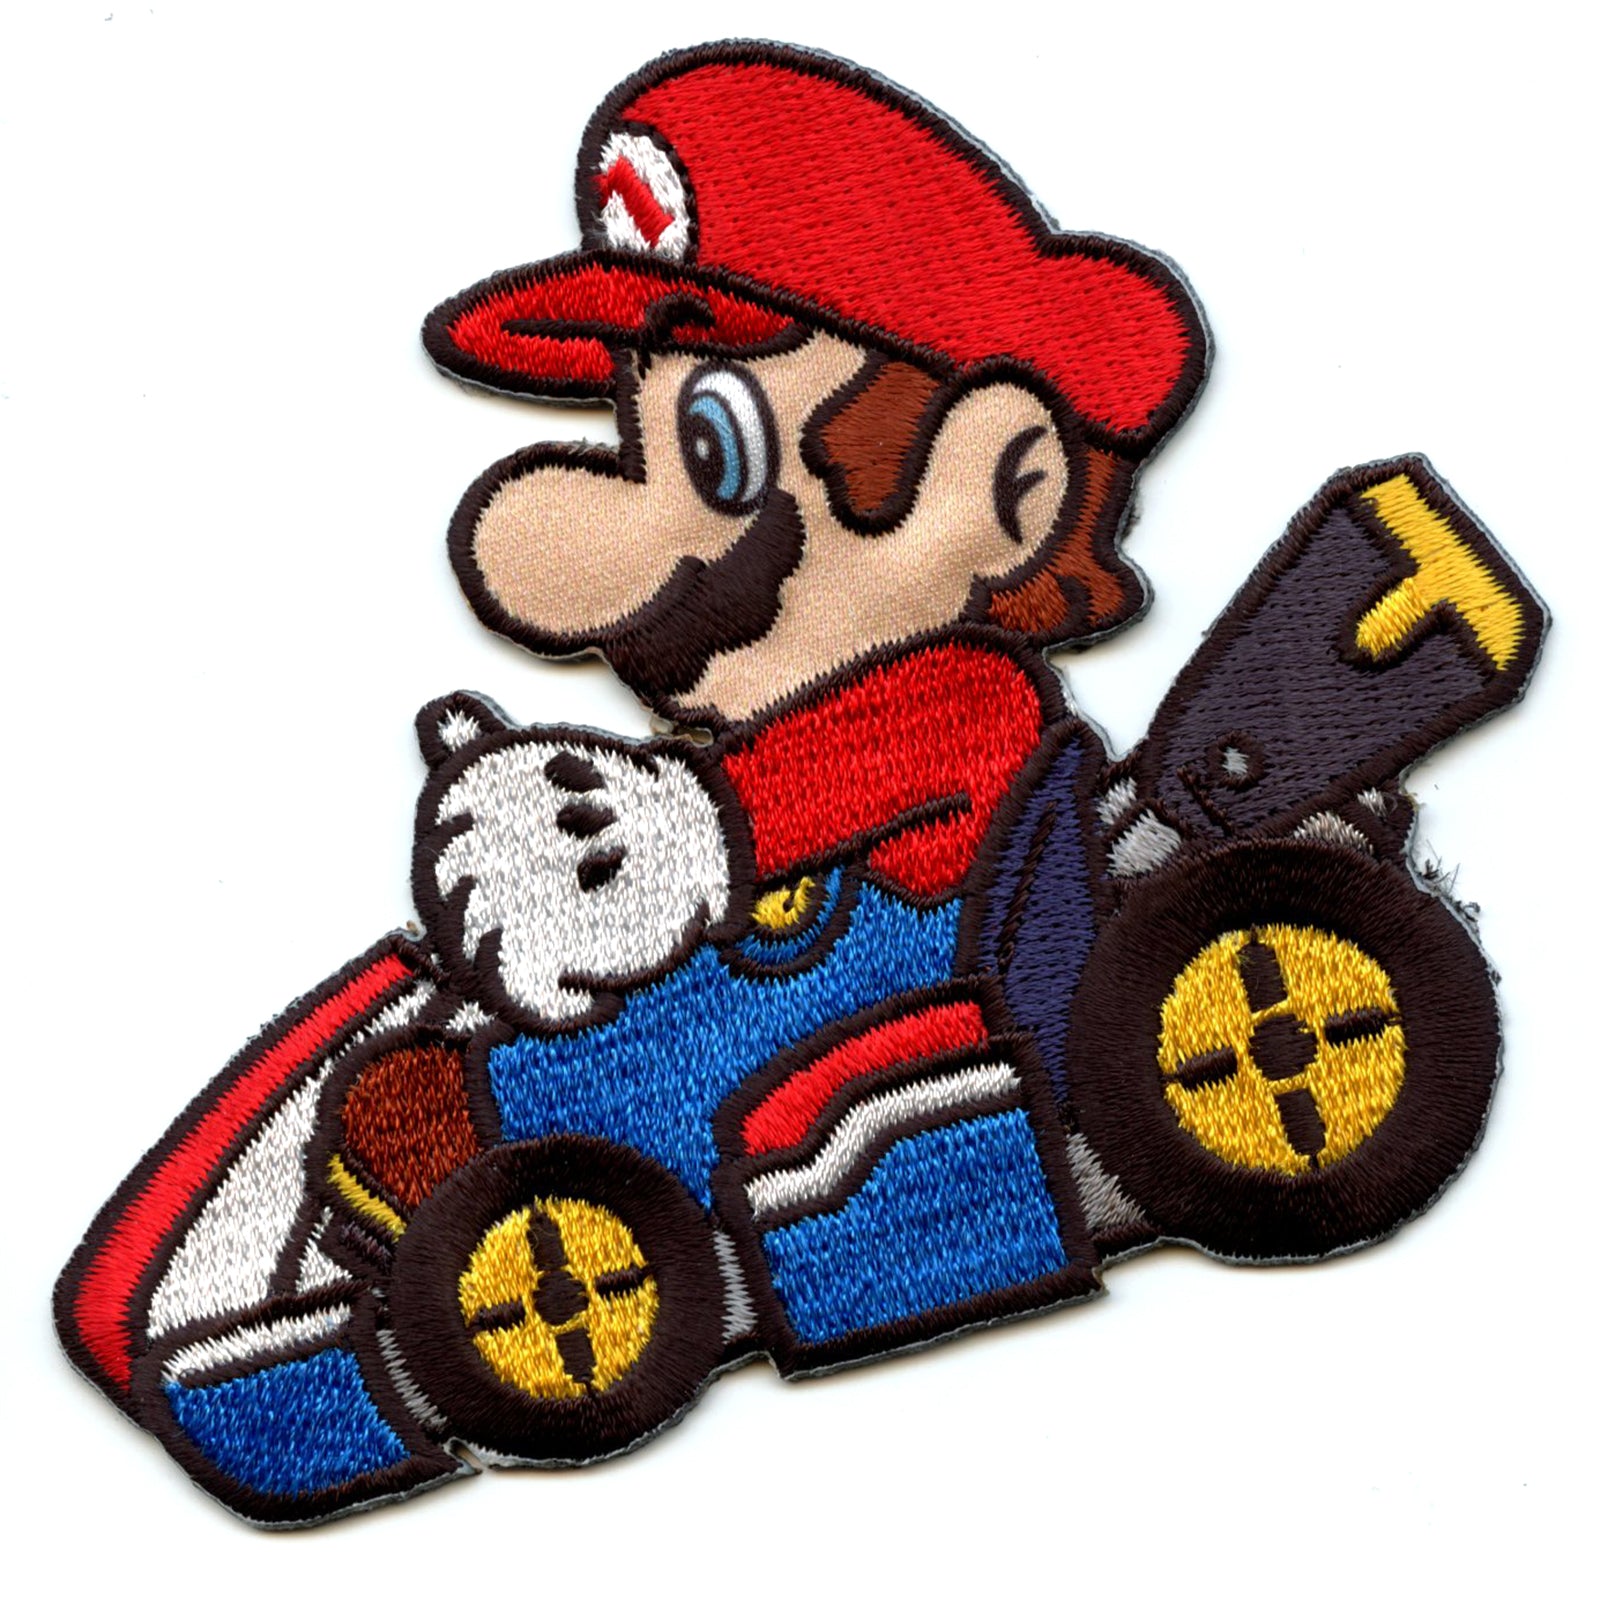 Mario kart embroidered Gaming patch